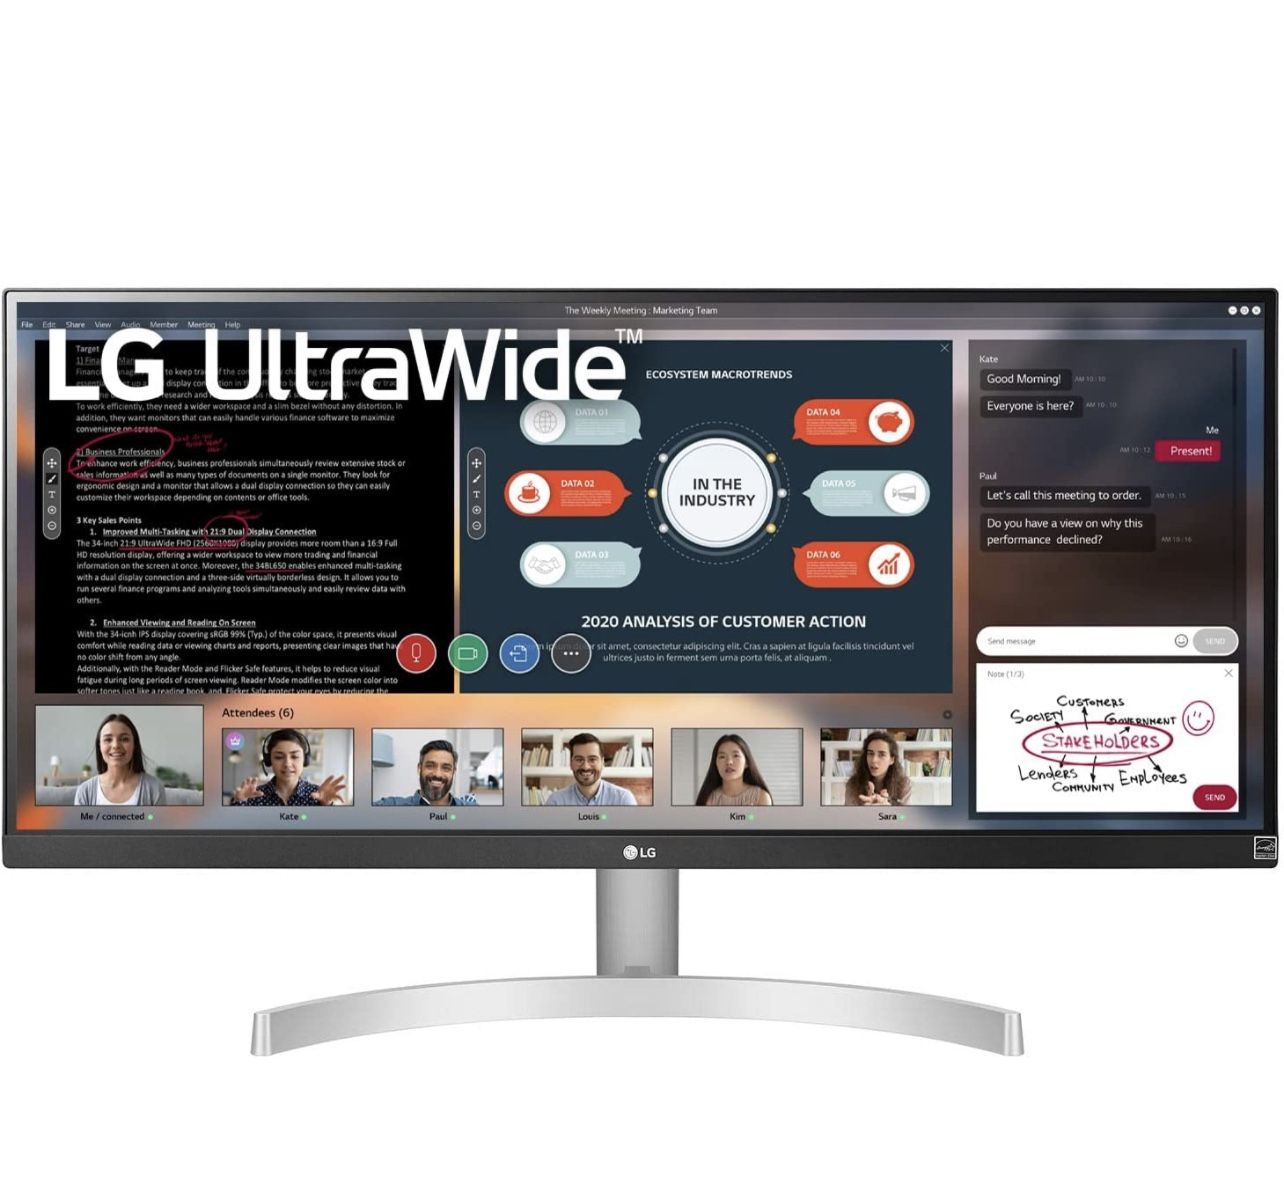 LG UltraWide 29” WFHD IPS HDR Monitor 75hz refresh rate